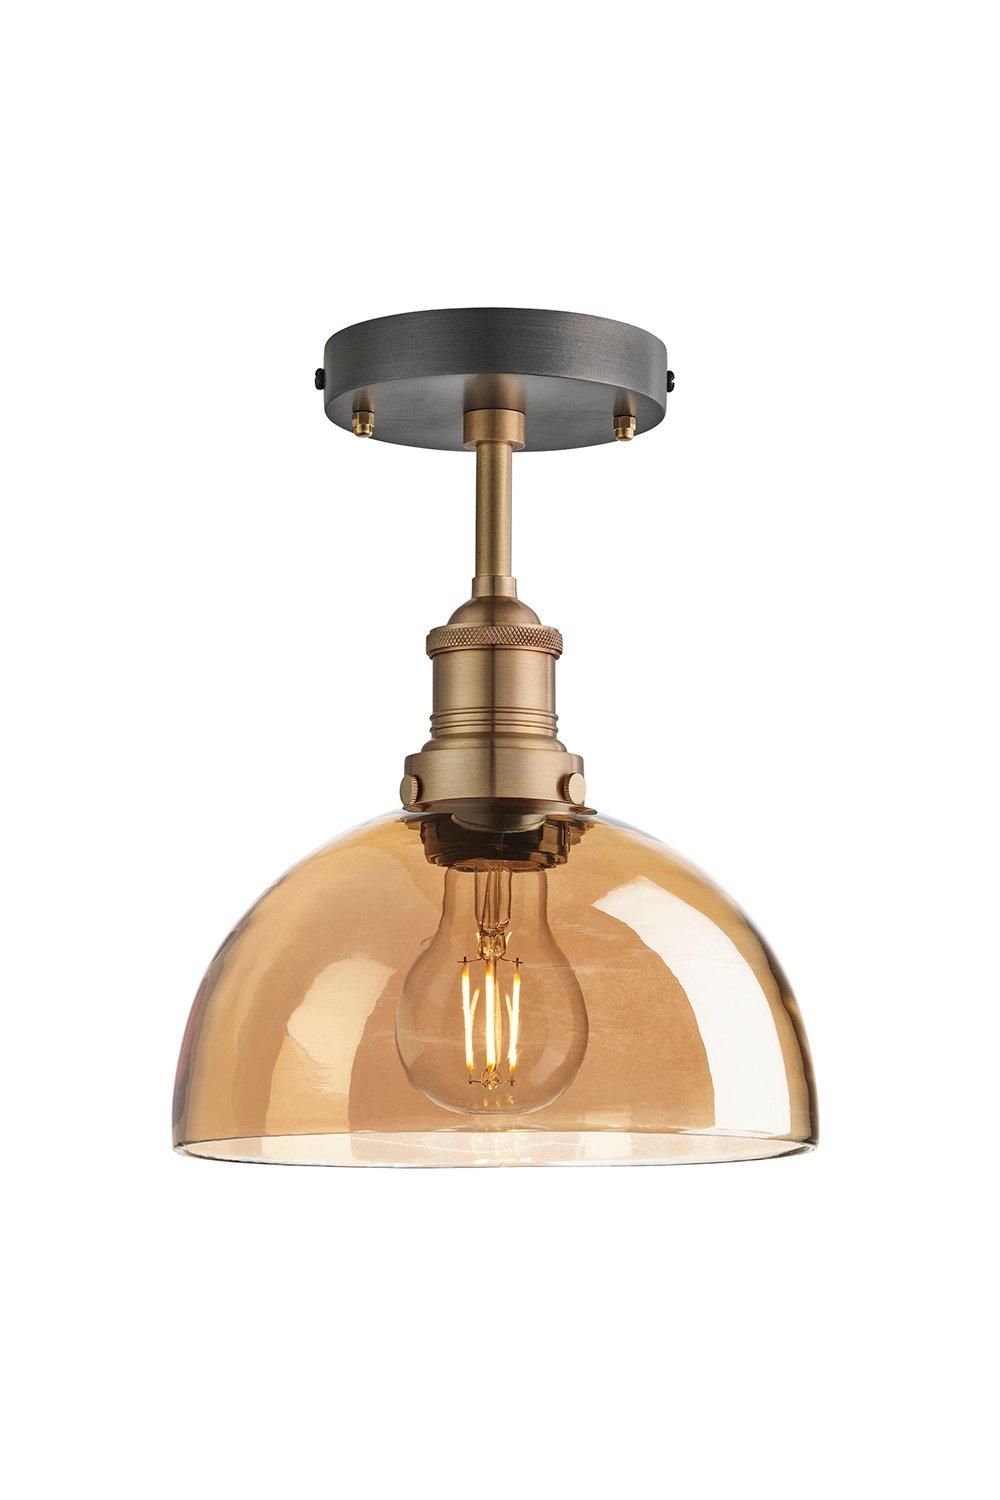 Brooklyn Tinted Glass Dome Flush Mount, 8 Inch, Amber, Brass holder